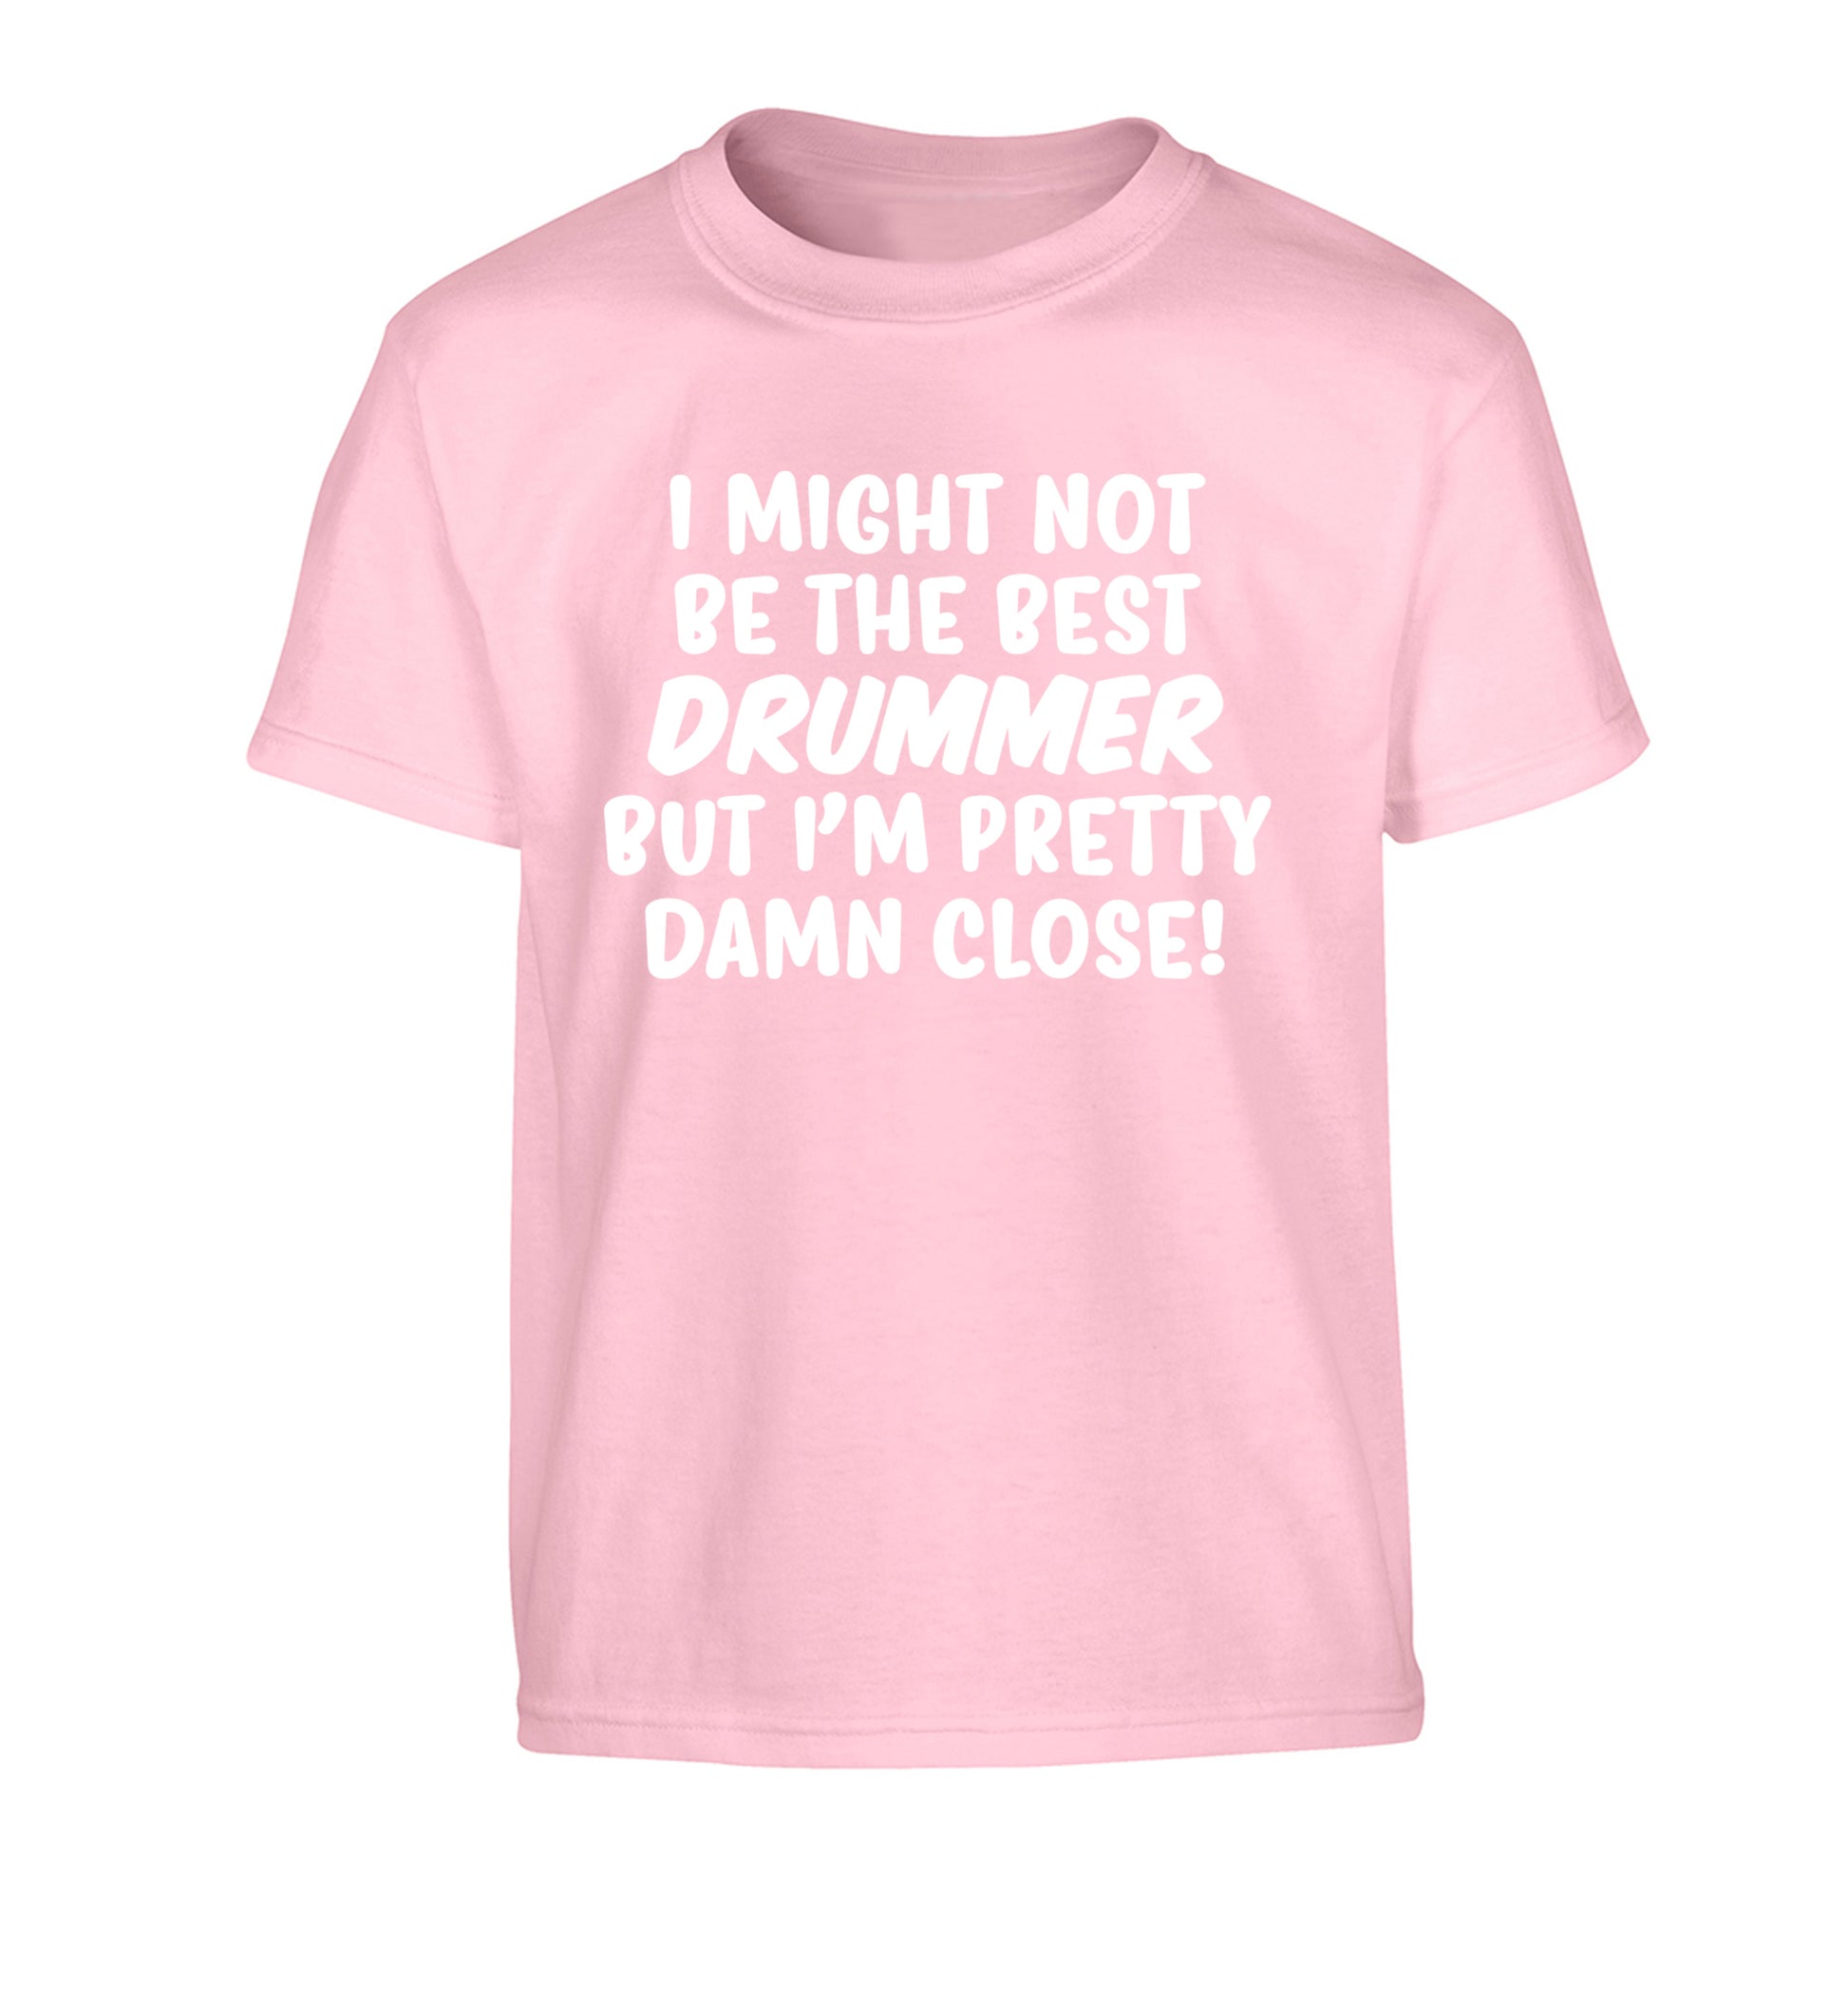 I might not be the best drummer but I'm pretty close! Children's light pink Tshirt 12-14 Years